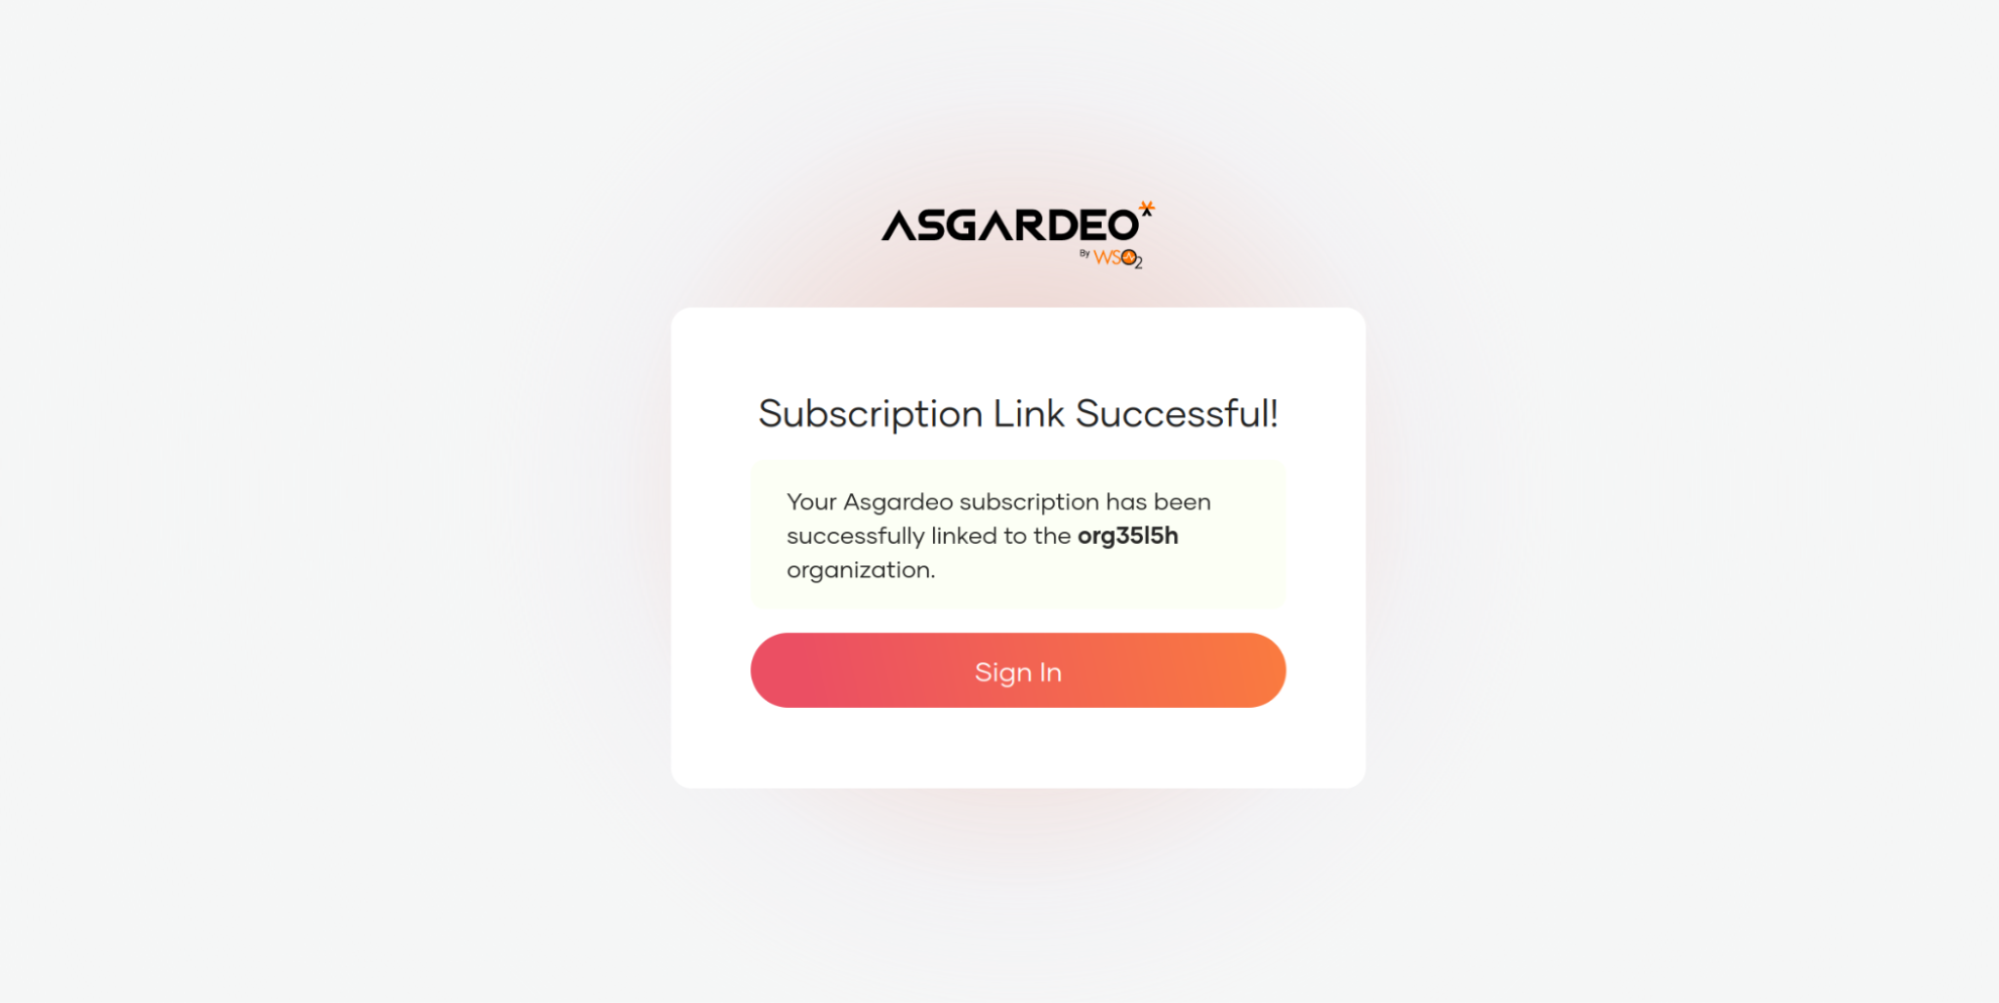 Successfully linked subscription to an Asgardeo organization